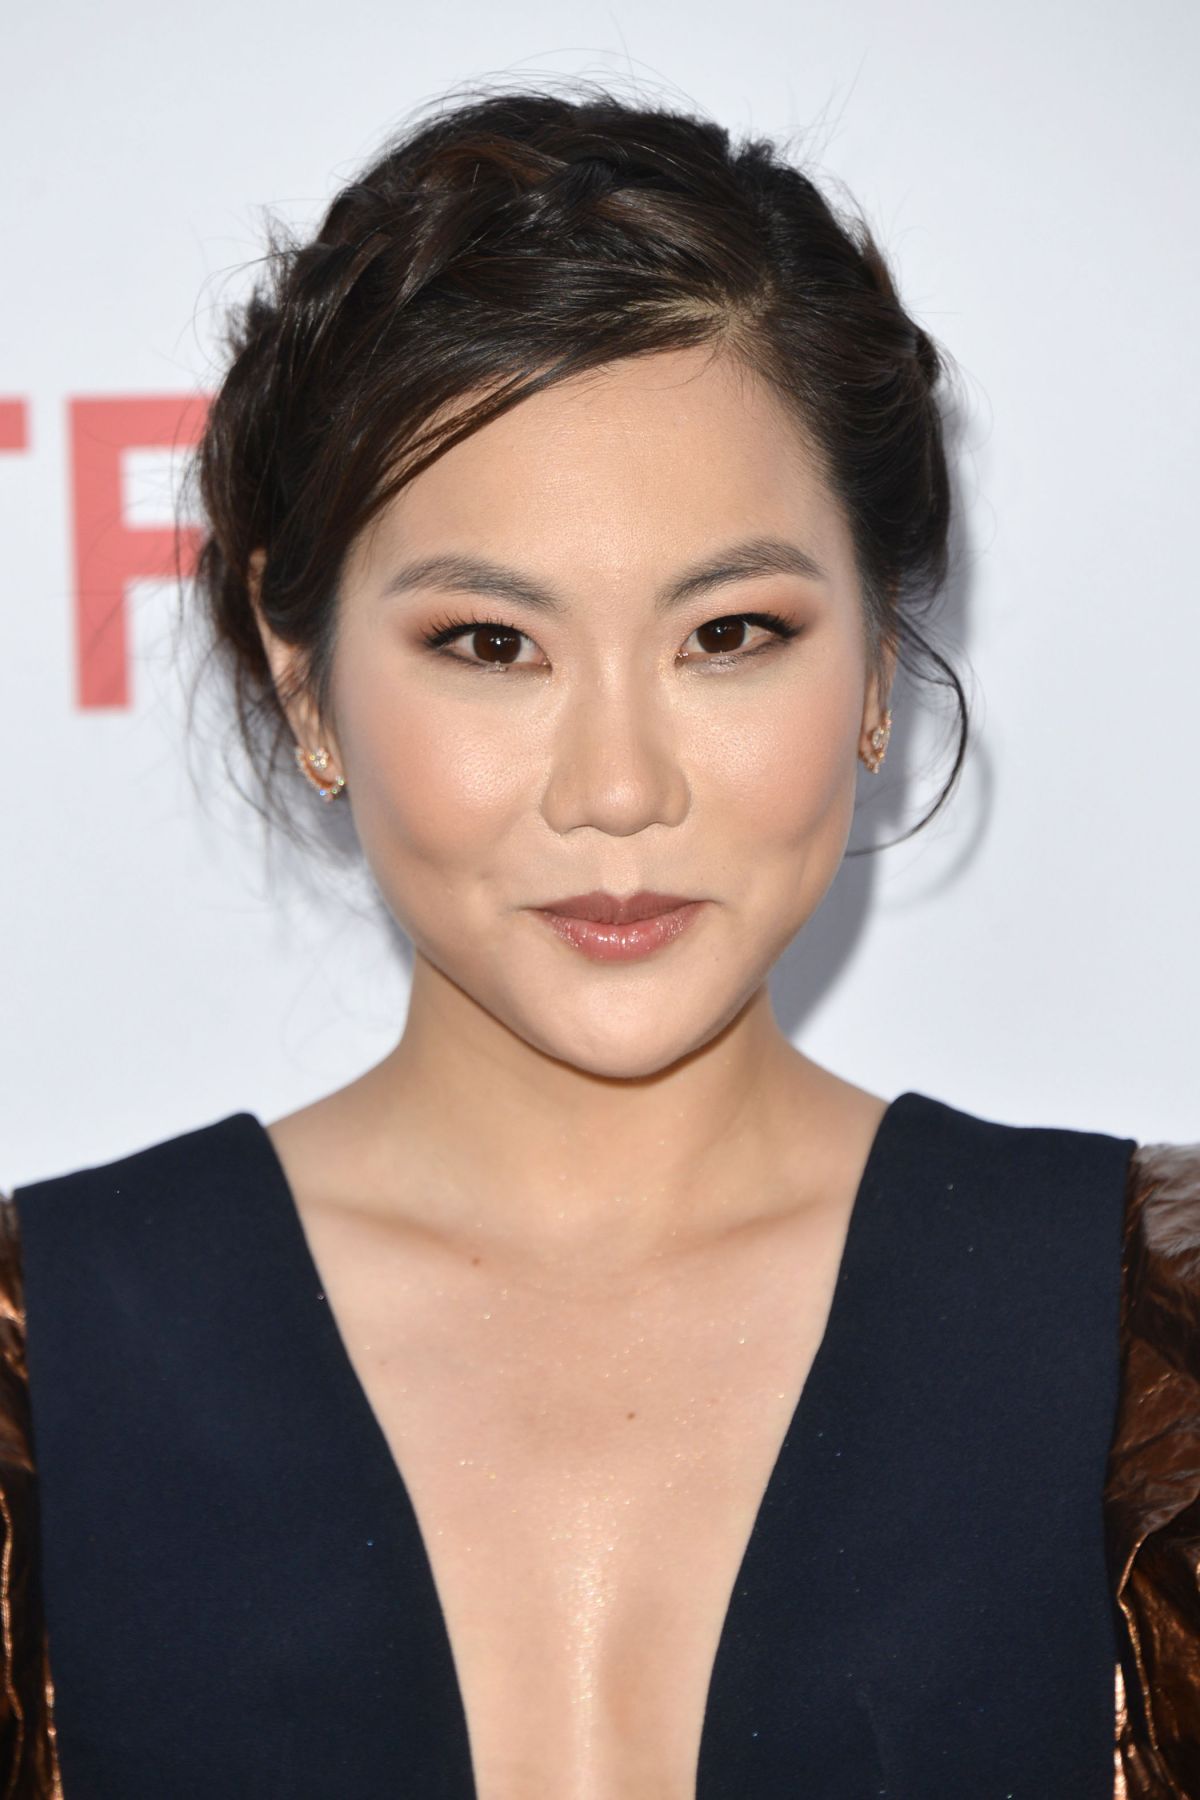 IRENE CHOI at Insatiable Show Premiere in Los Angeles 08/09/2018.